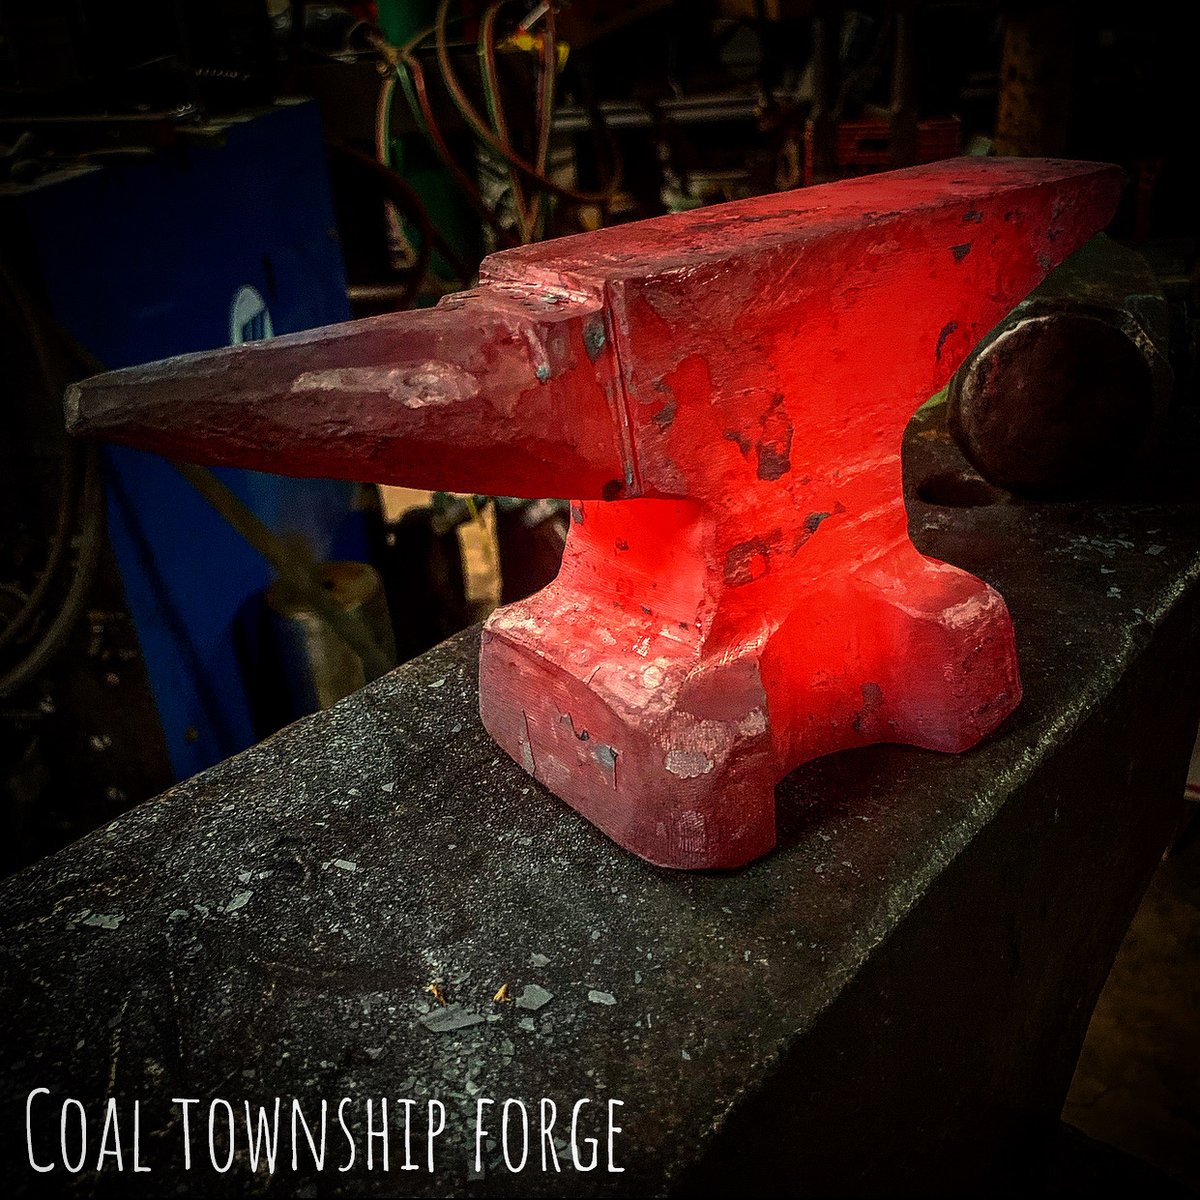 Handforged Mini Anvil “ London Pattern” (Made to Order)